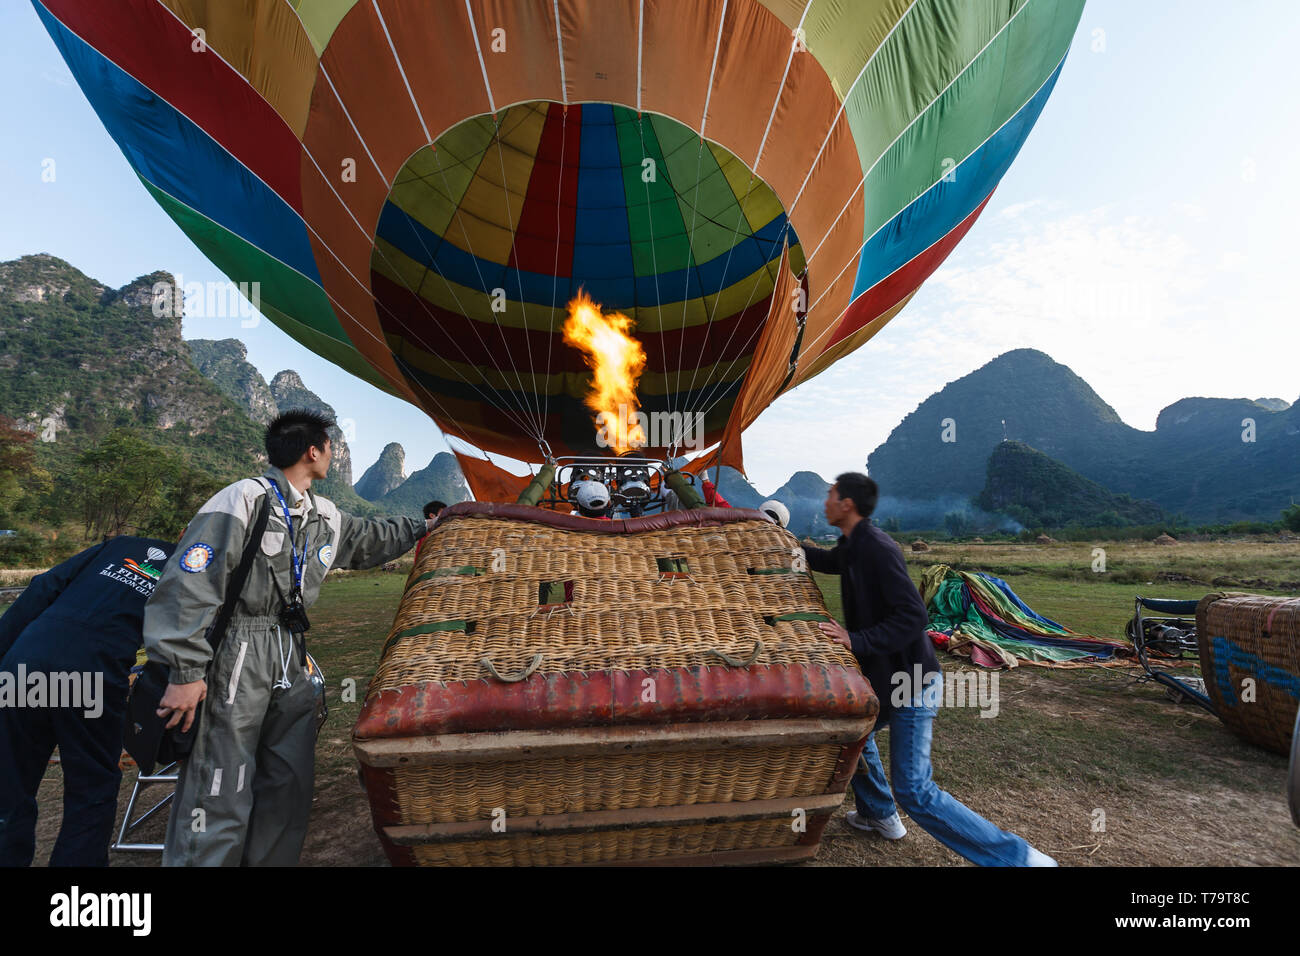 Workers tip basket so people can climb in a hot air balloon for a ride over the Yangshao Valley and mountains Stock Photo